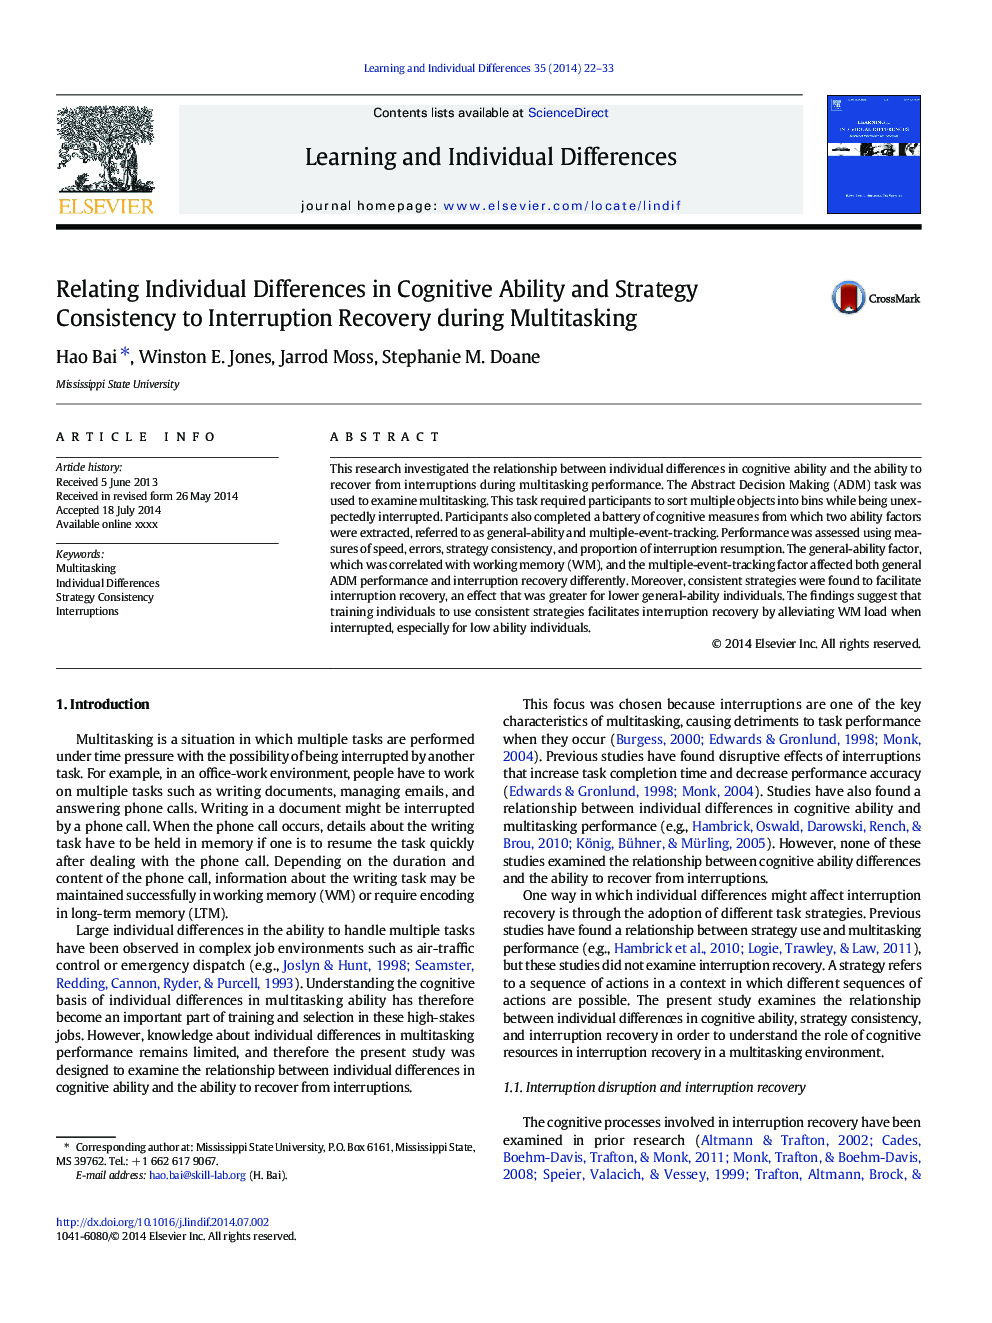 Relating Individual Differences in Cognitive Ability and Strategy Consistency to Interruption Recovery during Multitasking